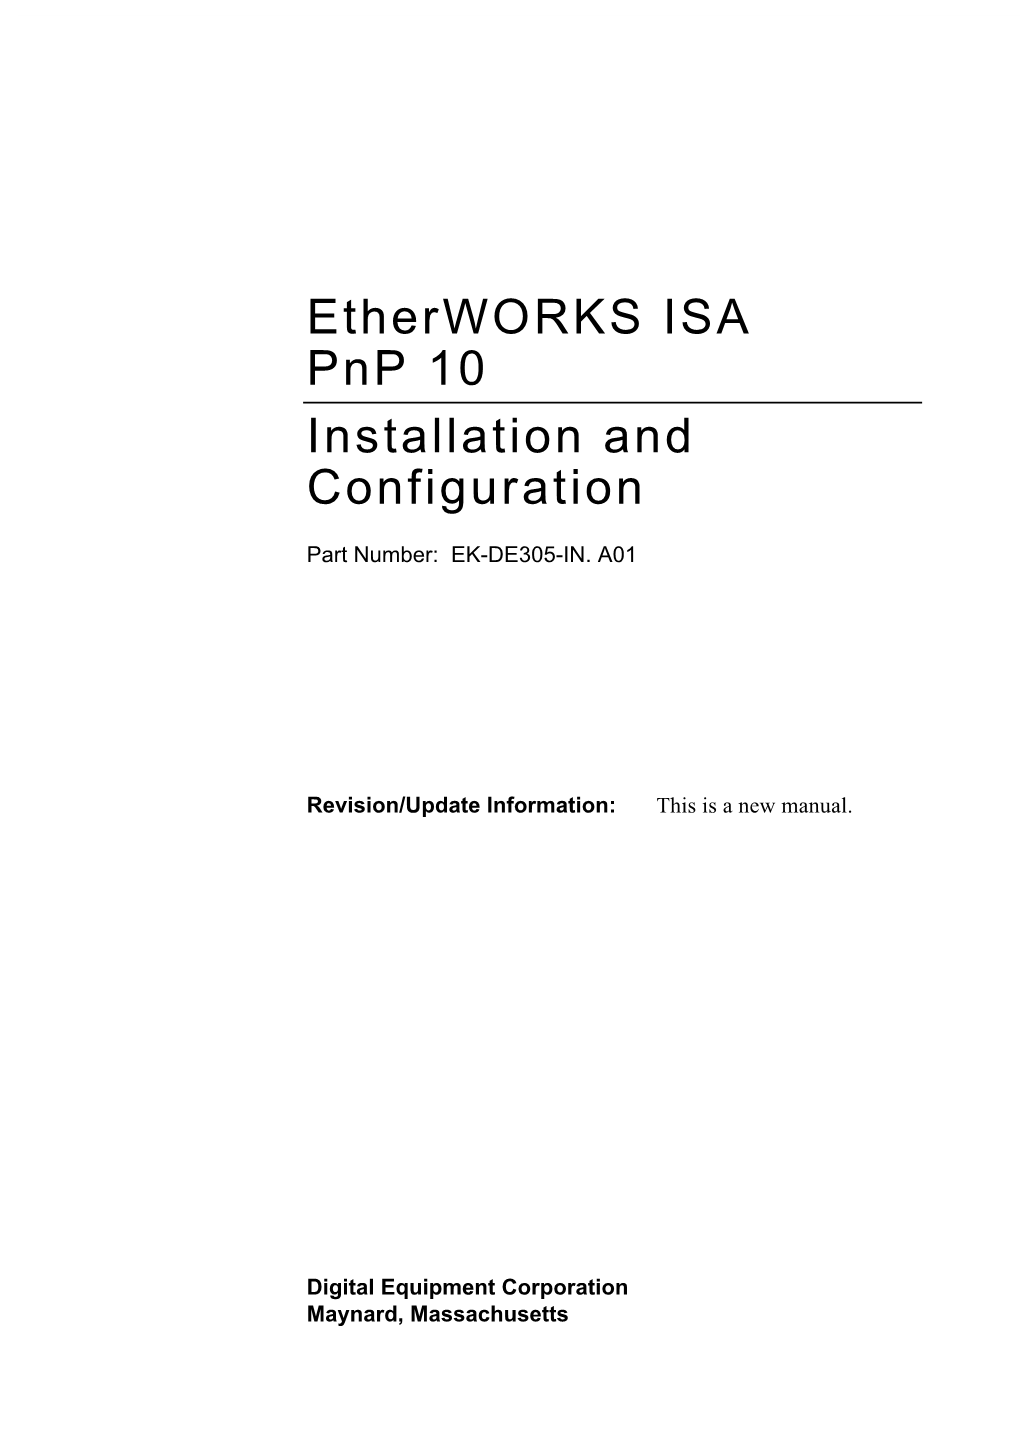 Etherworks ISA Pnp Installation and Configuration